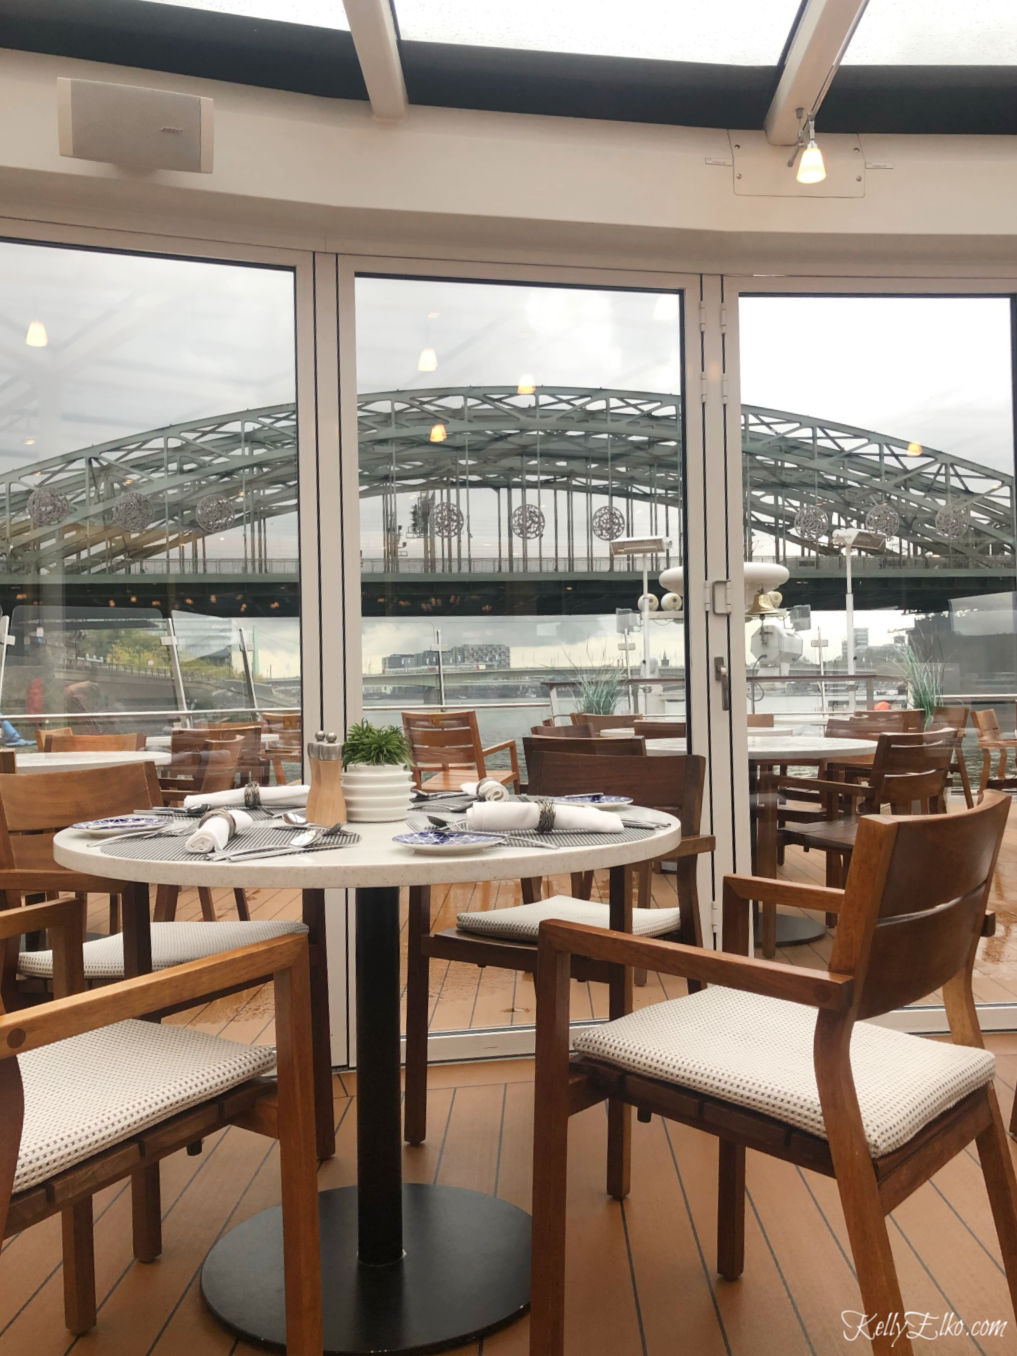 Viking River Cruise - love the views from the glass enclosed restaurant kellyelko.com #vikingrivercruise #vikingcruise #rivercruise #vikinglongship #travel #travelblog #cruisereviews 